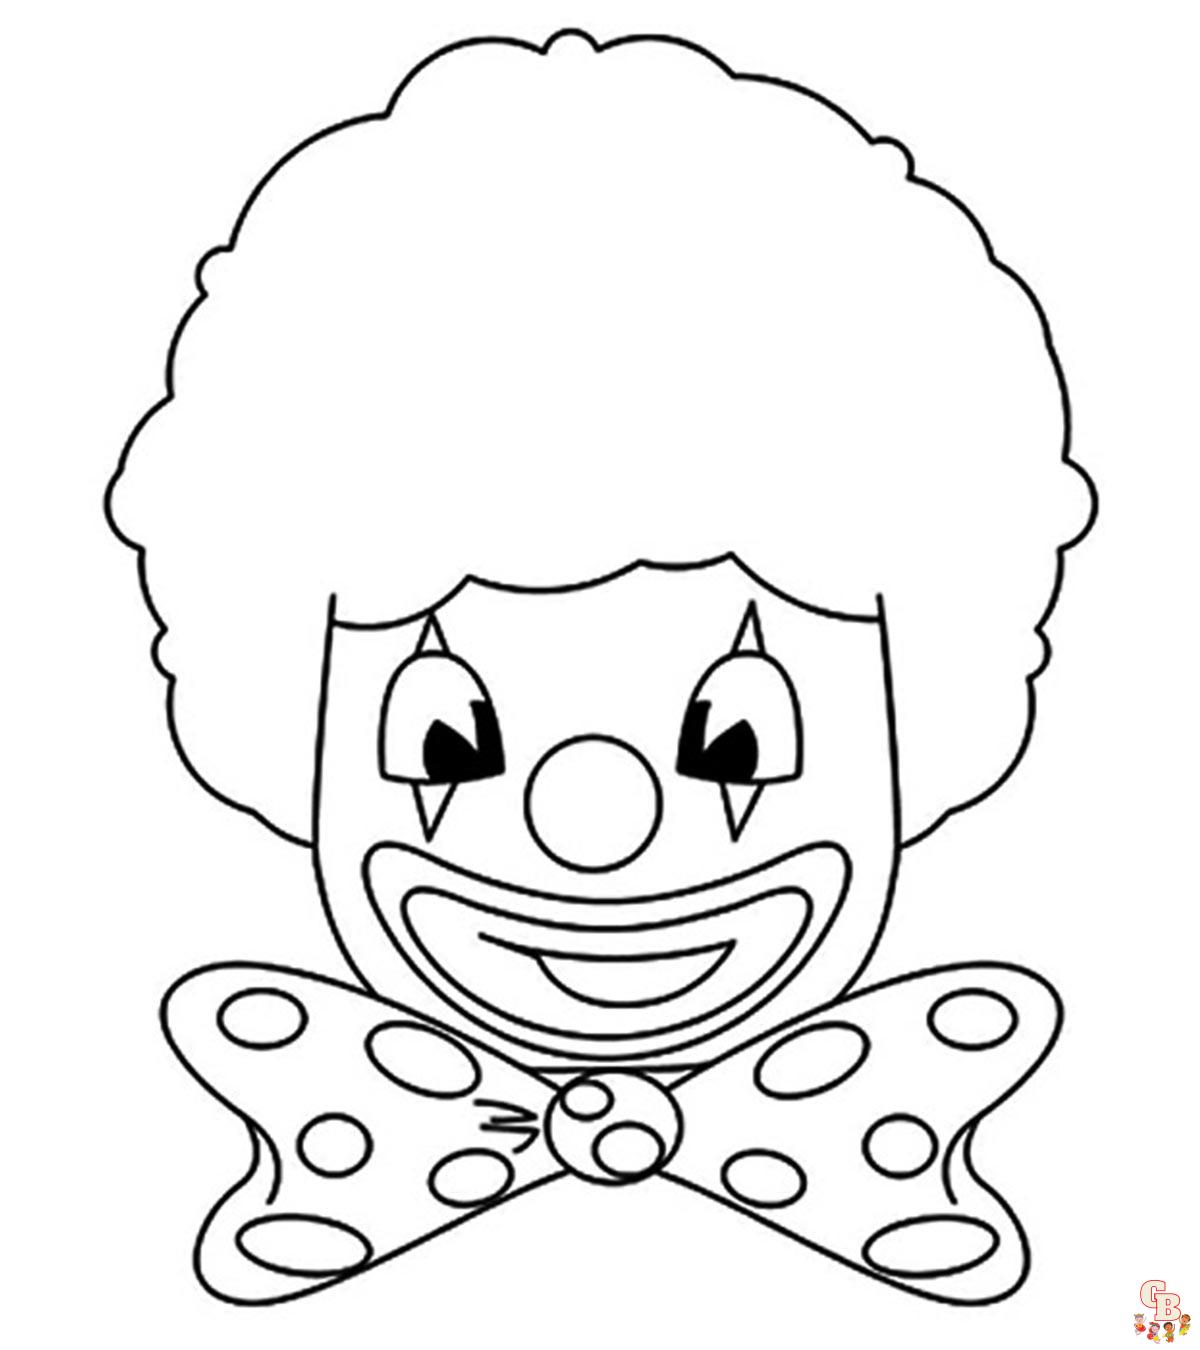 Pagliaccio face coloring pages 2